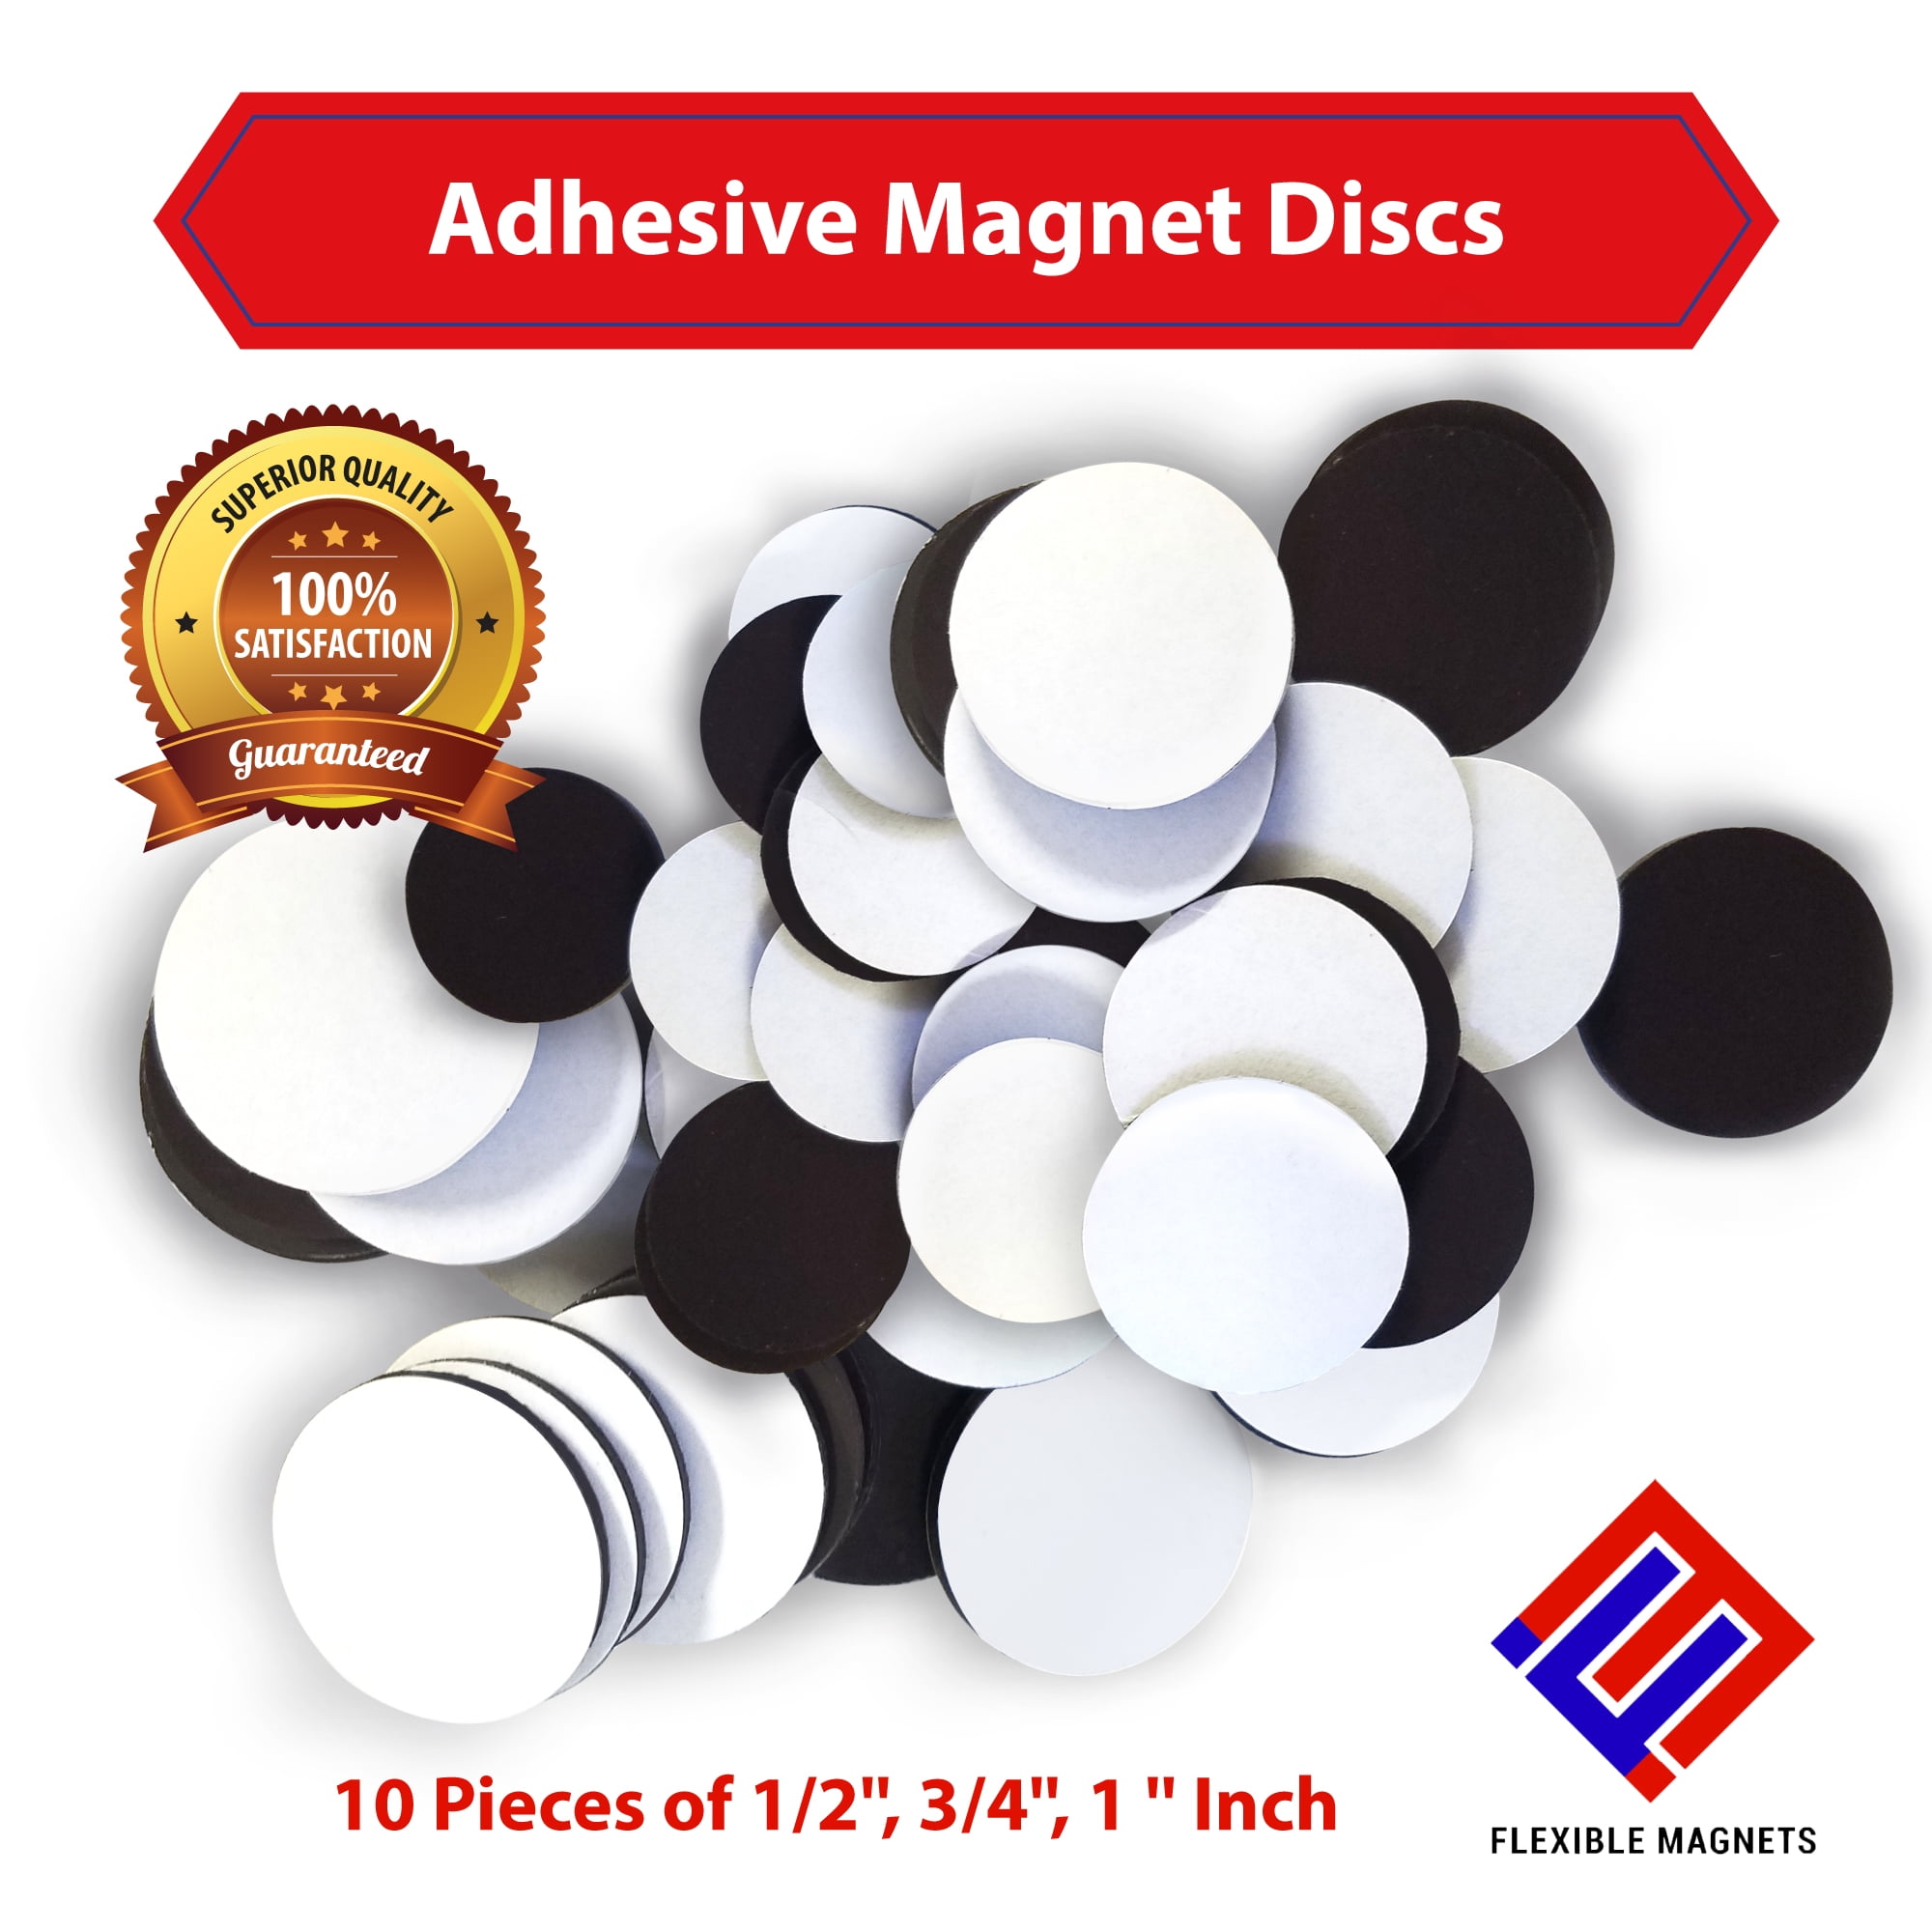 1 x 1 Inch Strong Flexible Self-Adhesive Magnetic Squares 96 Pieces 